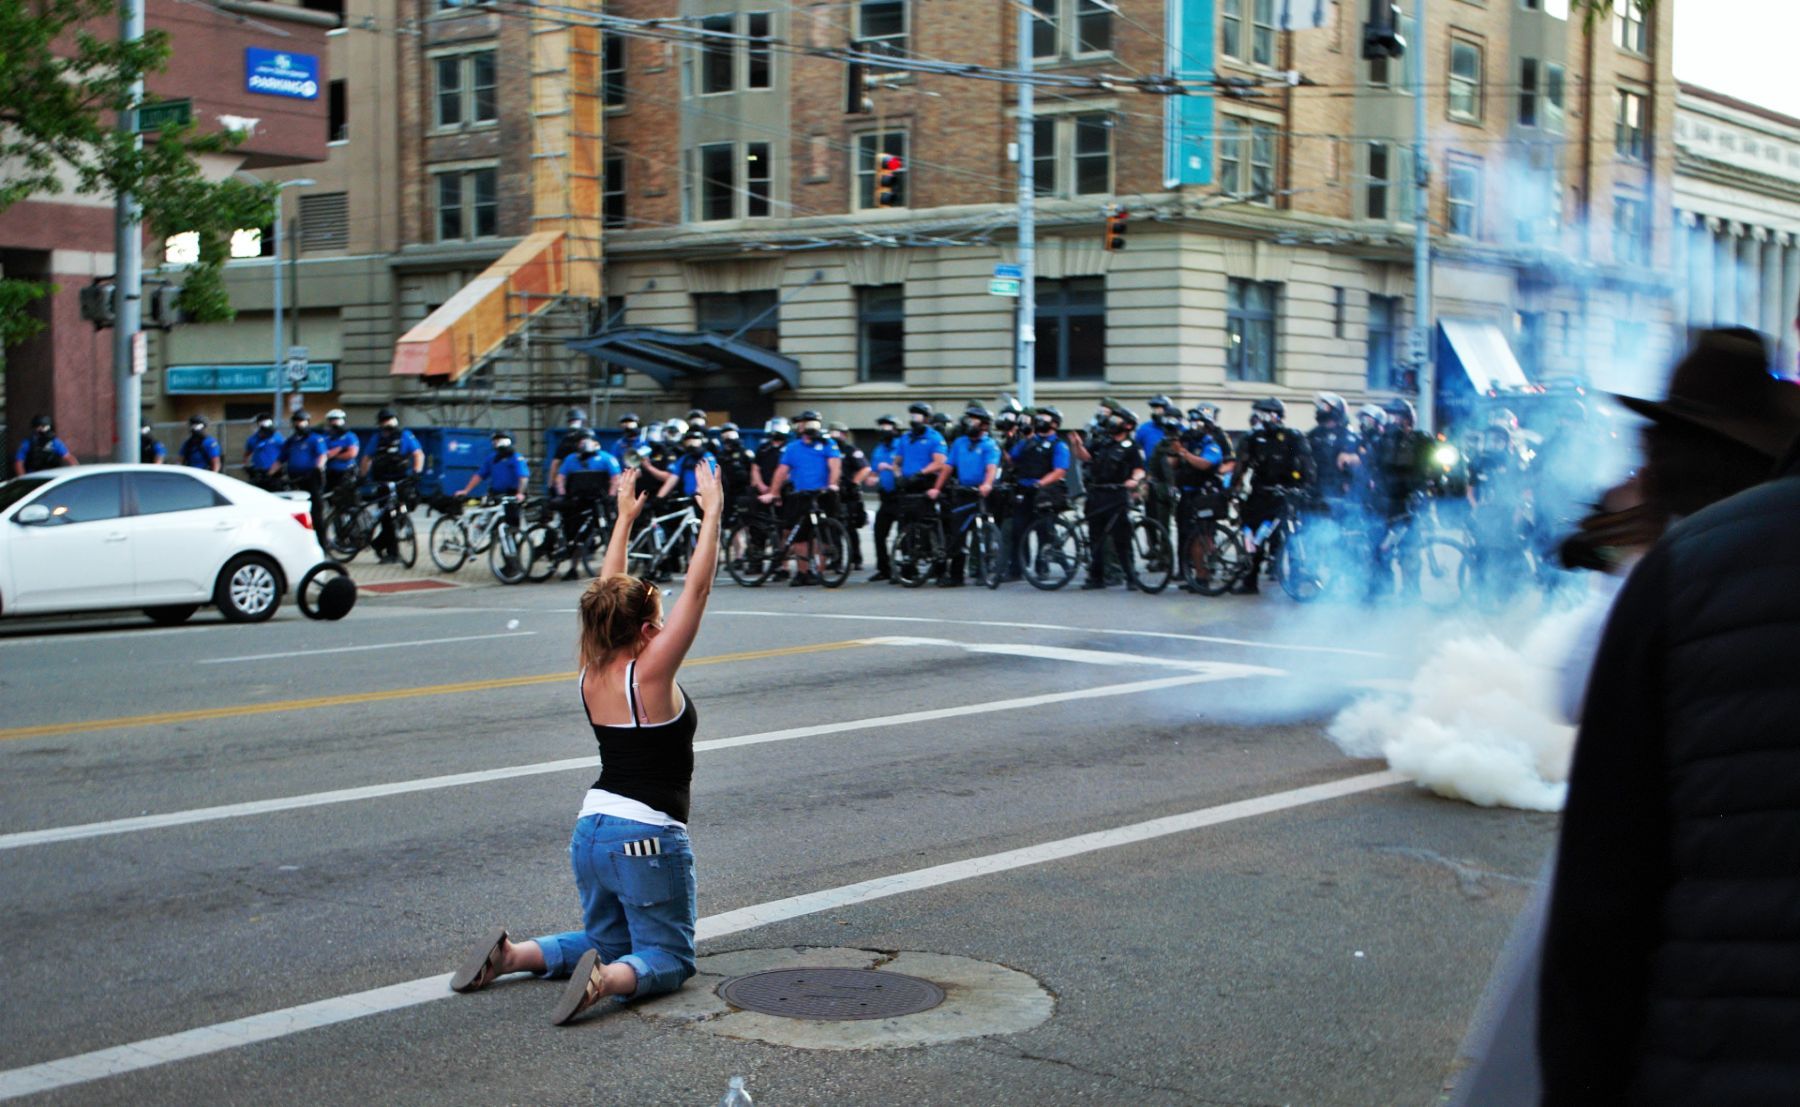 Police officers deploy tear gas at a protest as a protester kneels in the street with her hands raised - racial discrimination